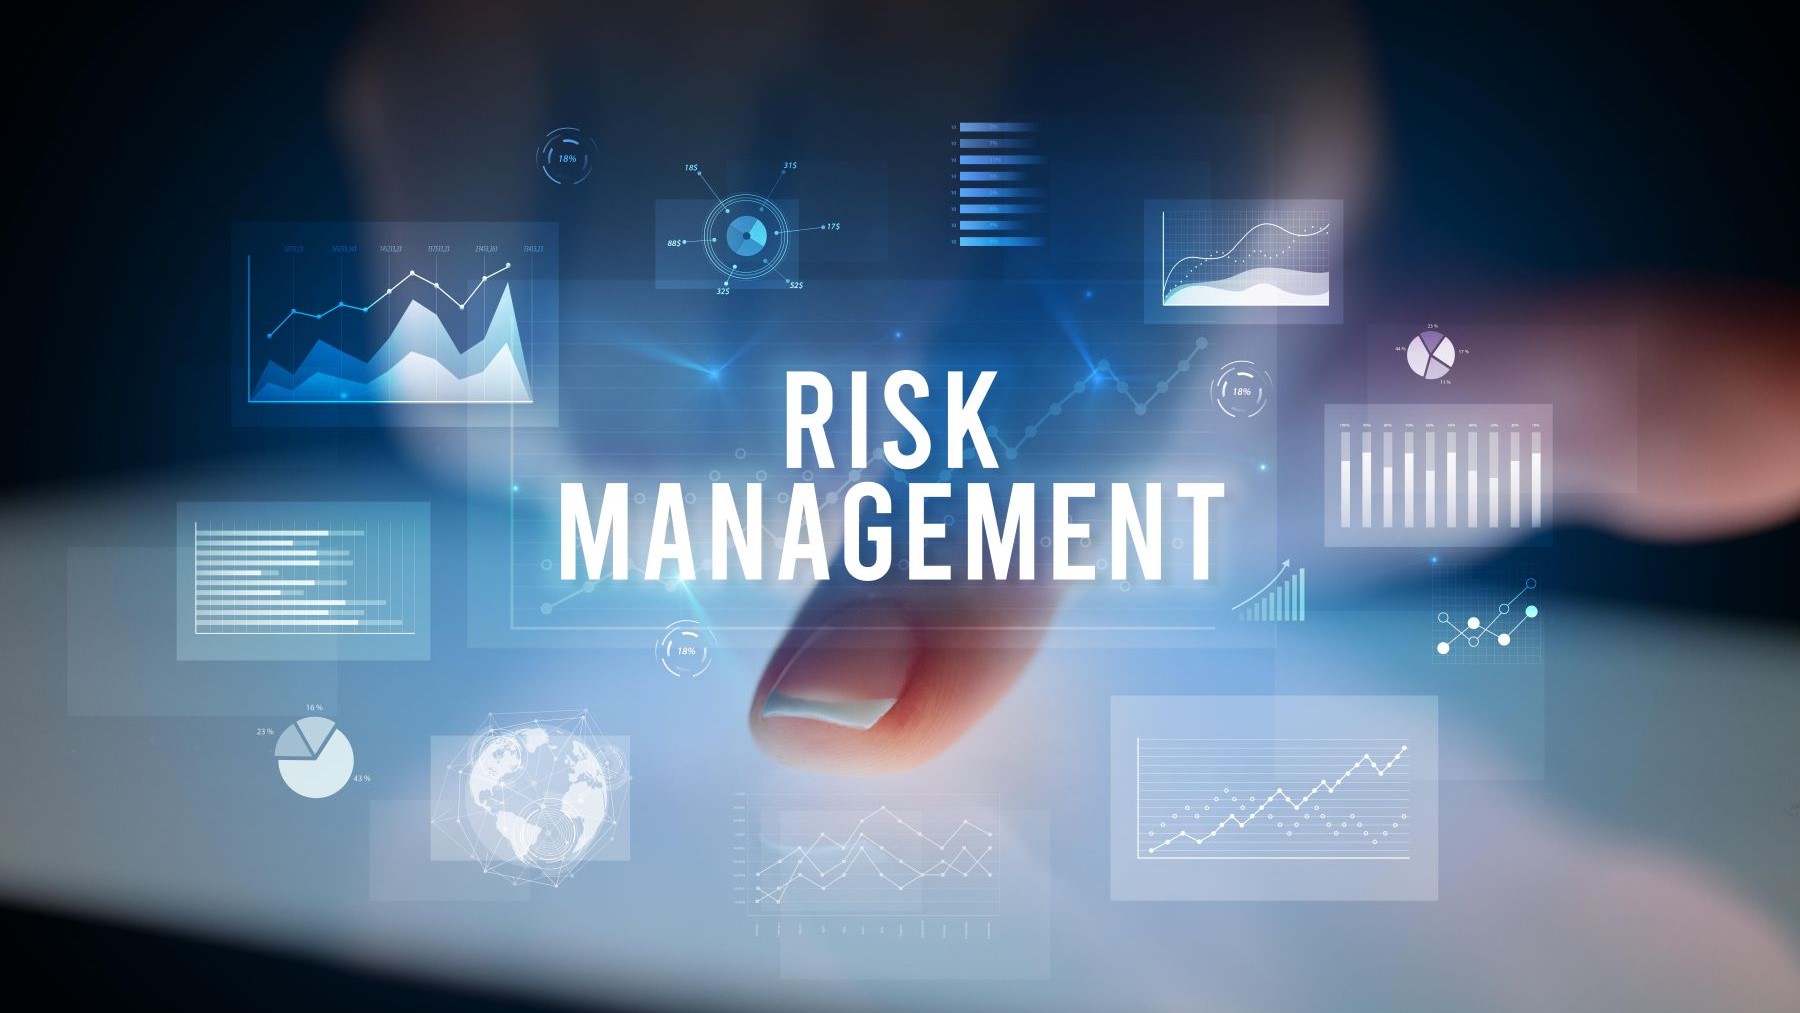 From Dark Reading – Are SOC 2 Reports Sufficient for Vendor Risk Management?